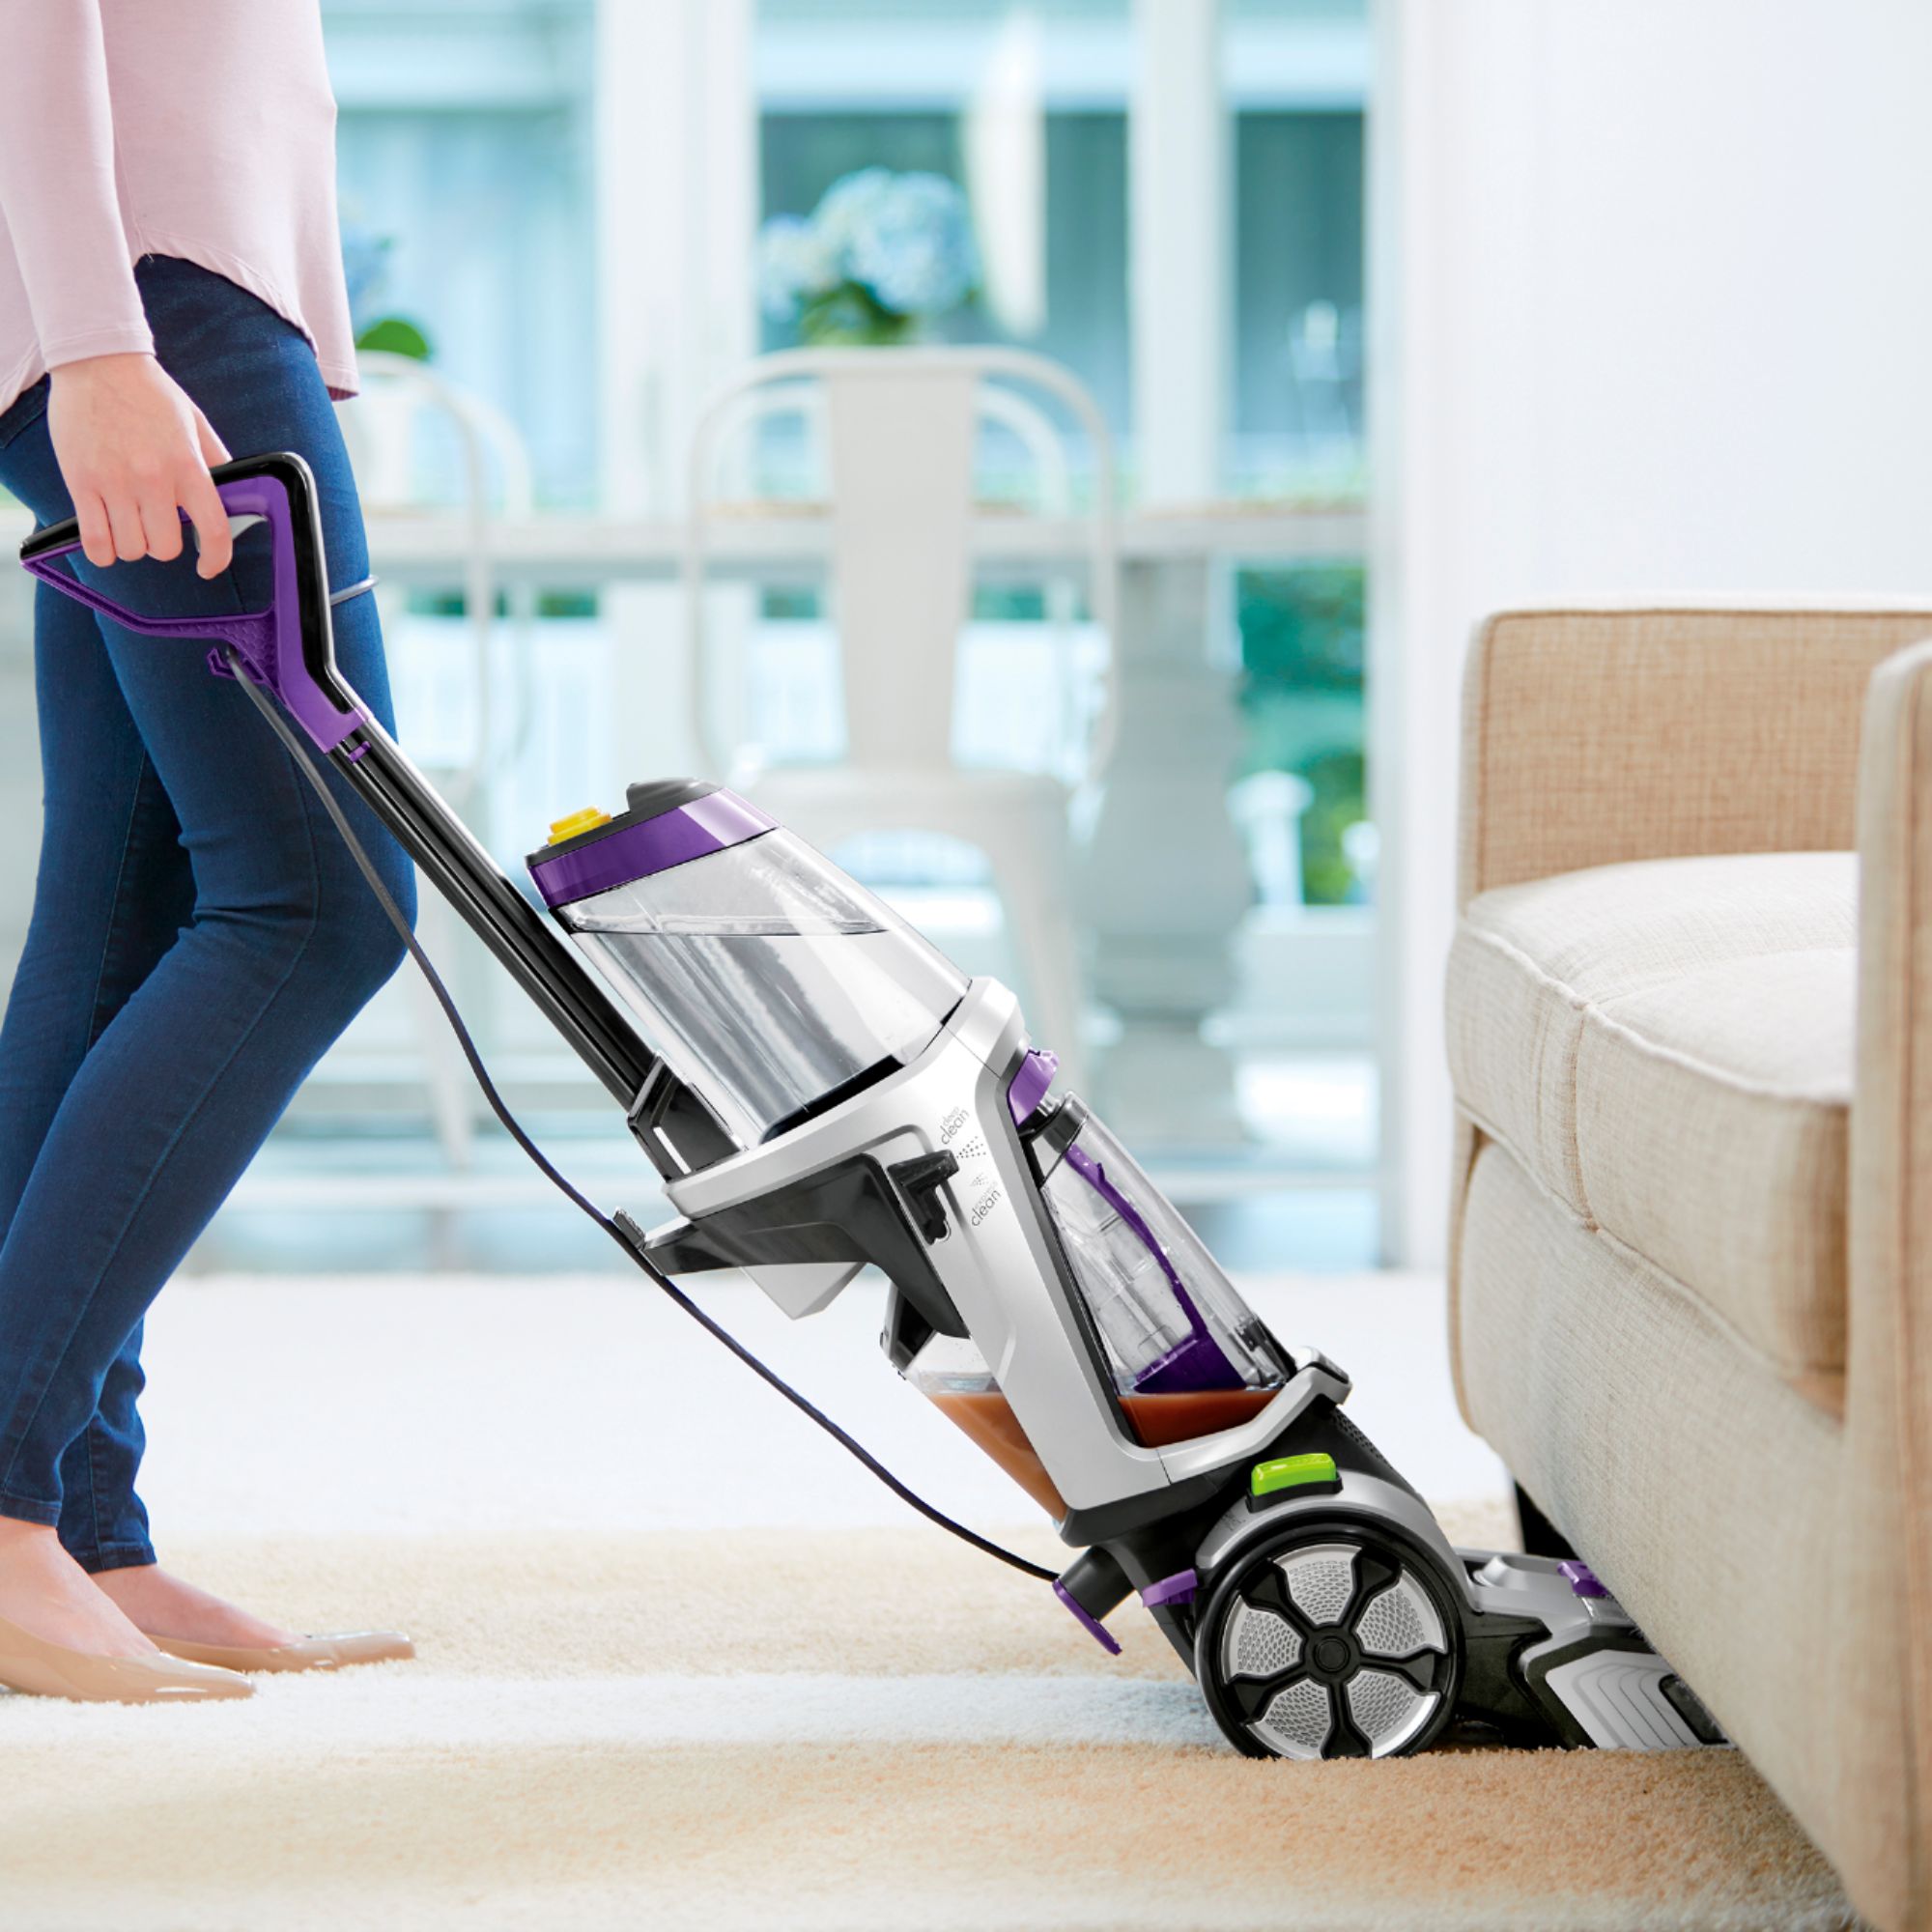 BISSELL - ProHeat 2X Revolution Pro Corded Upright Deep Cleaner - Silver/purple